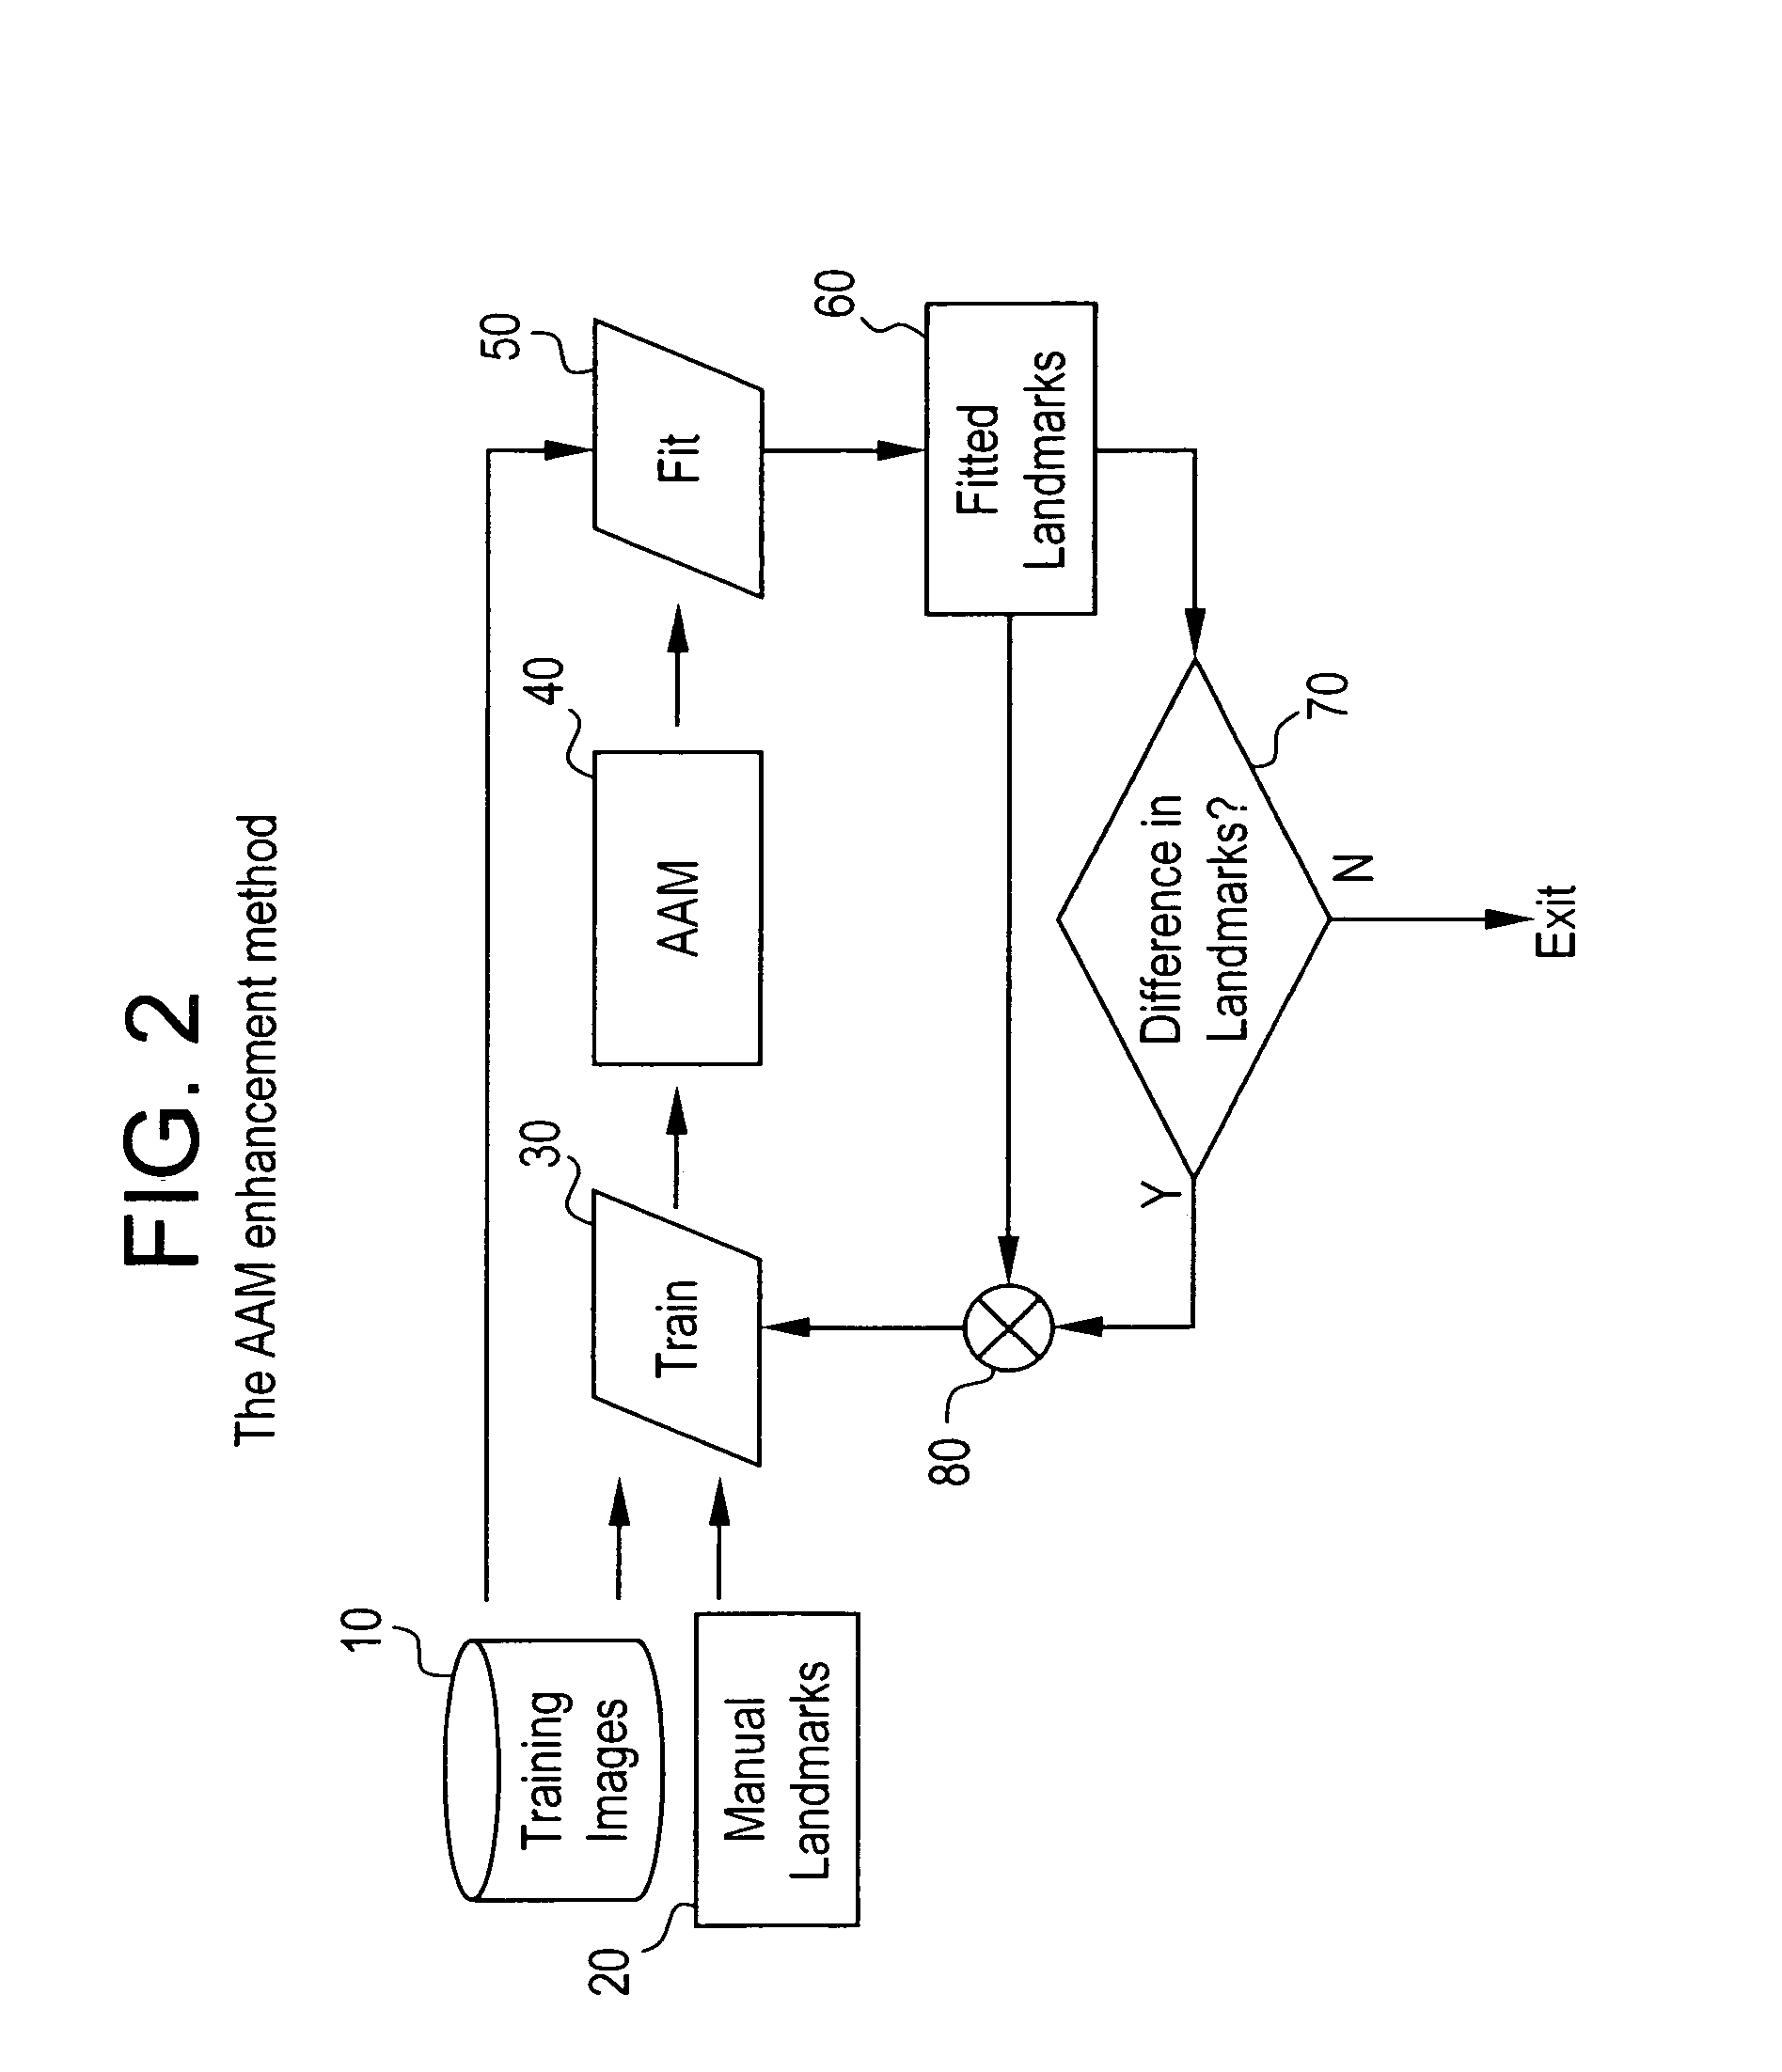 Method of combining images of multiple resolutions to produce an enhanced active appearance model